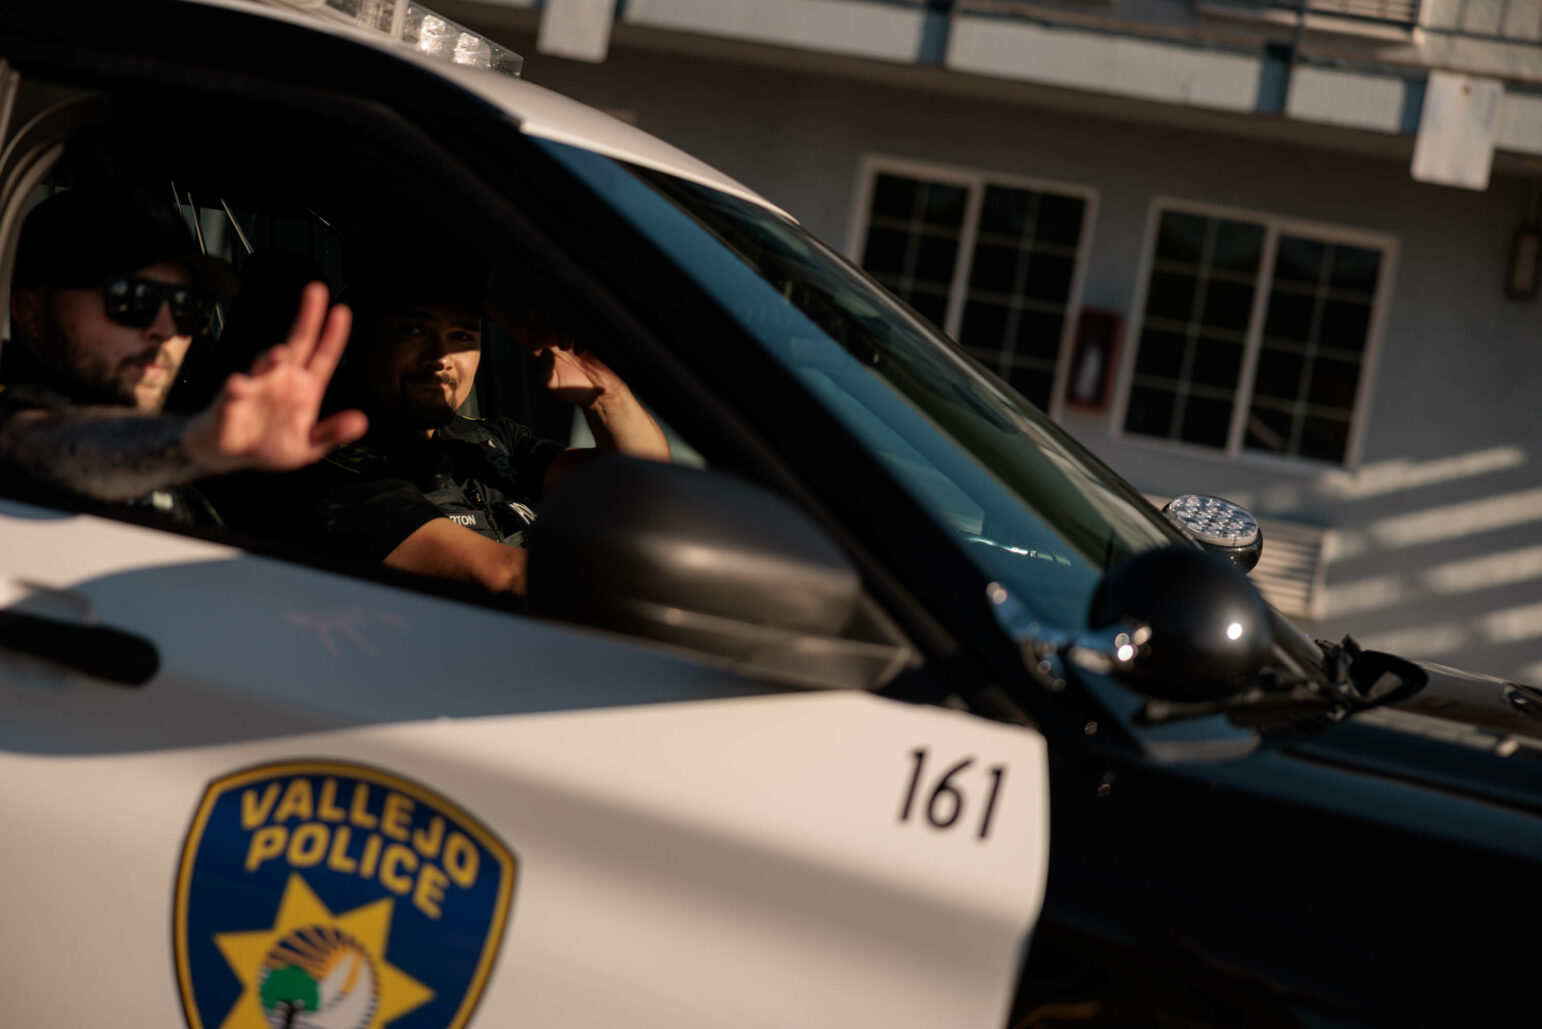 Two police officers in a patrol SUV, visible through the passenger side window, with one officer waving and the other raising his hand in a greeting or gesture. The car, marked with 'Vallejo Police' and the unit number '161', is partially shaded, with a motel partially visible in the background.